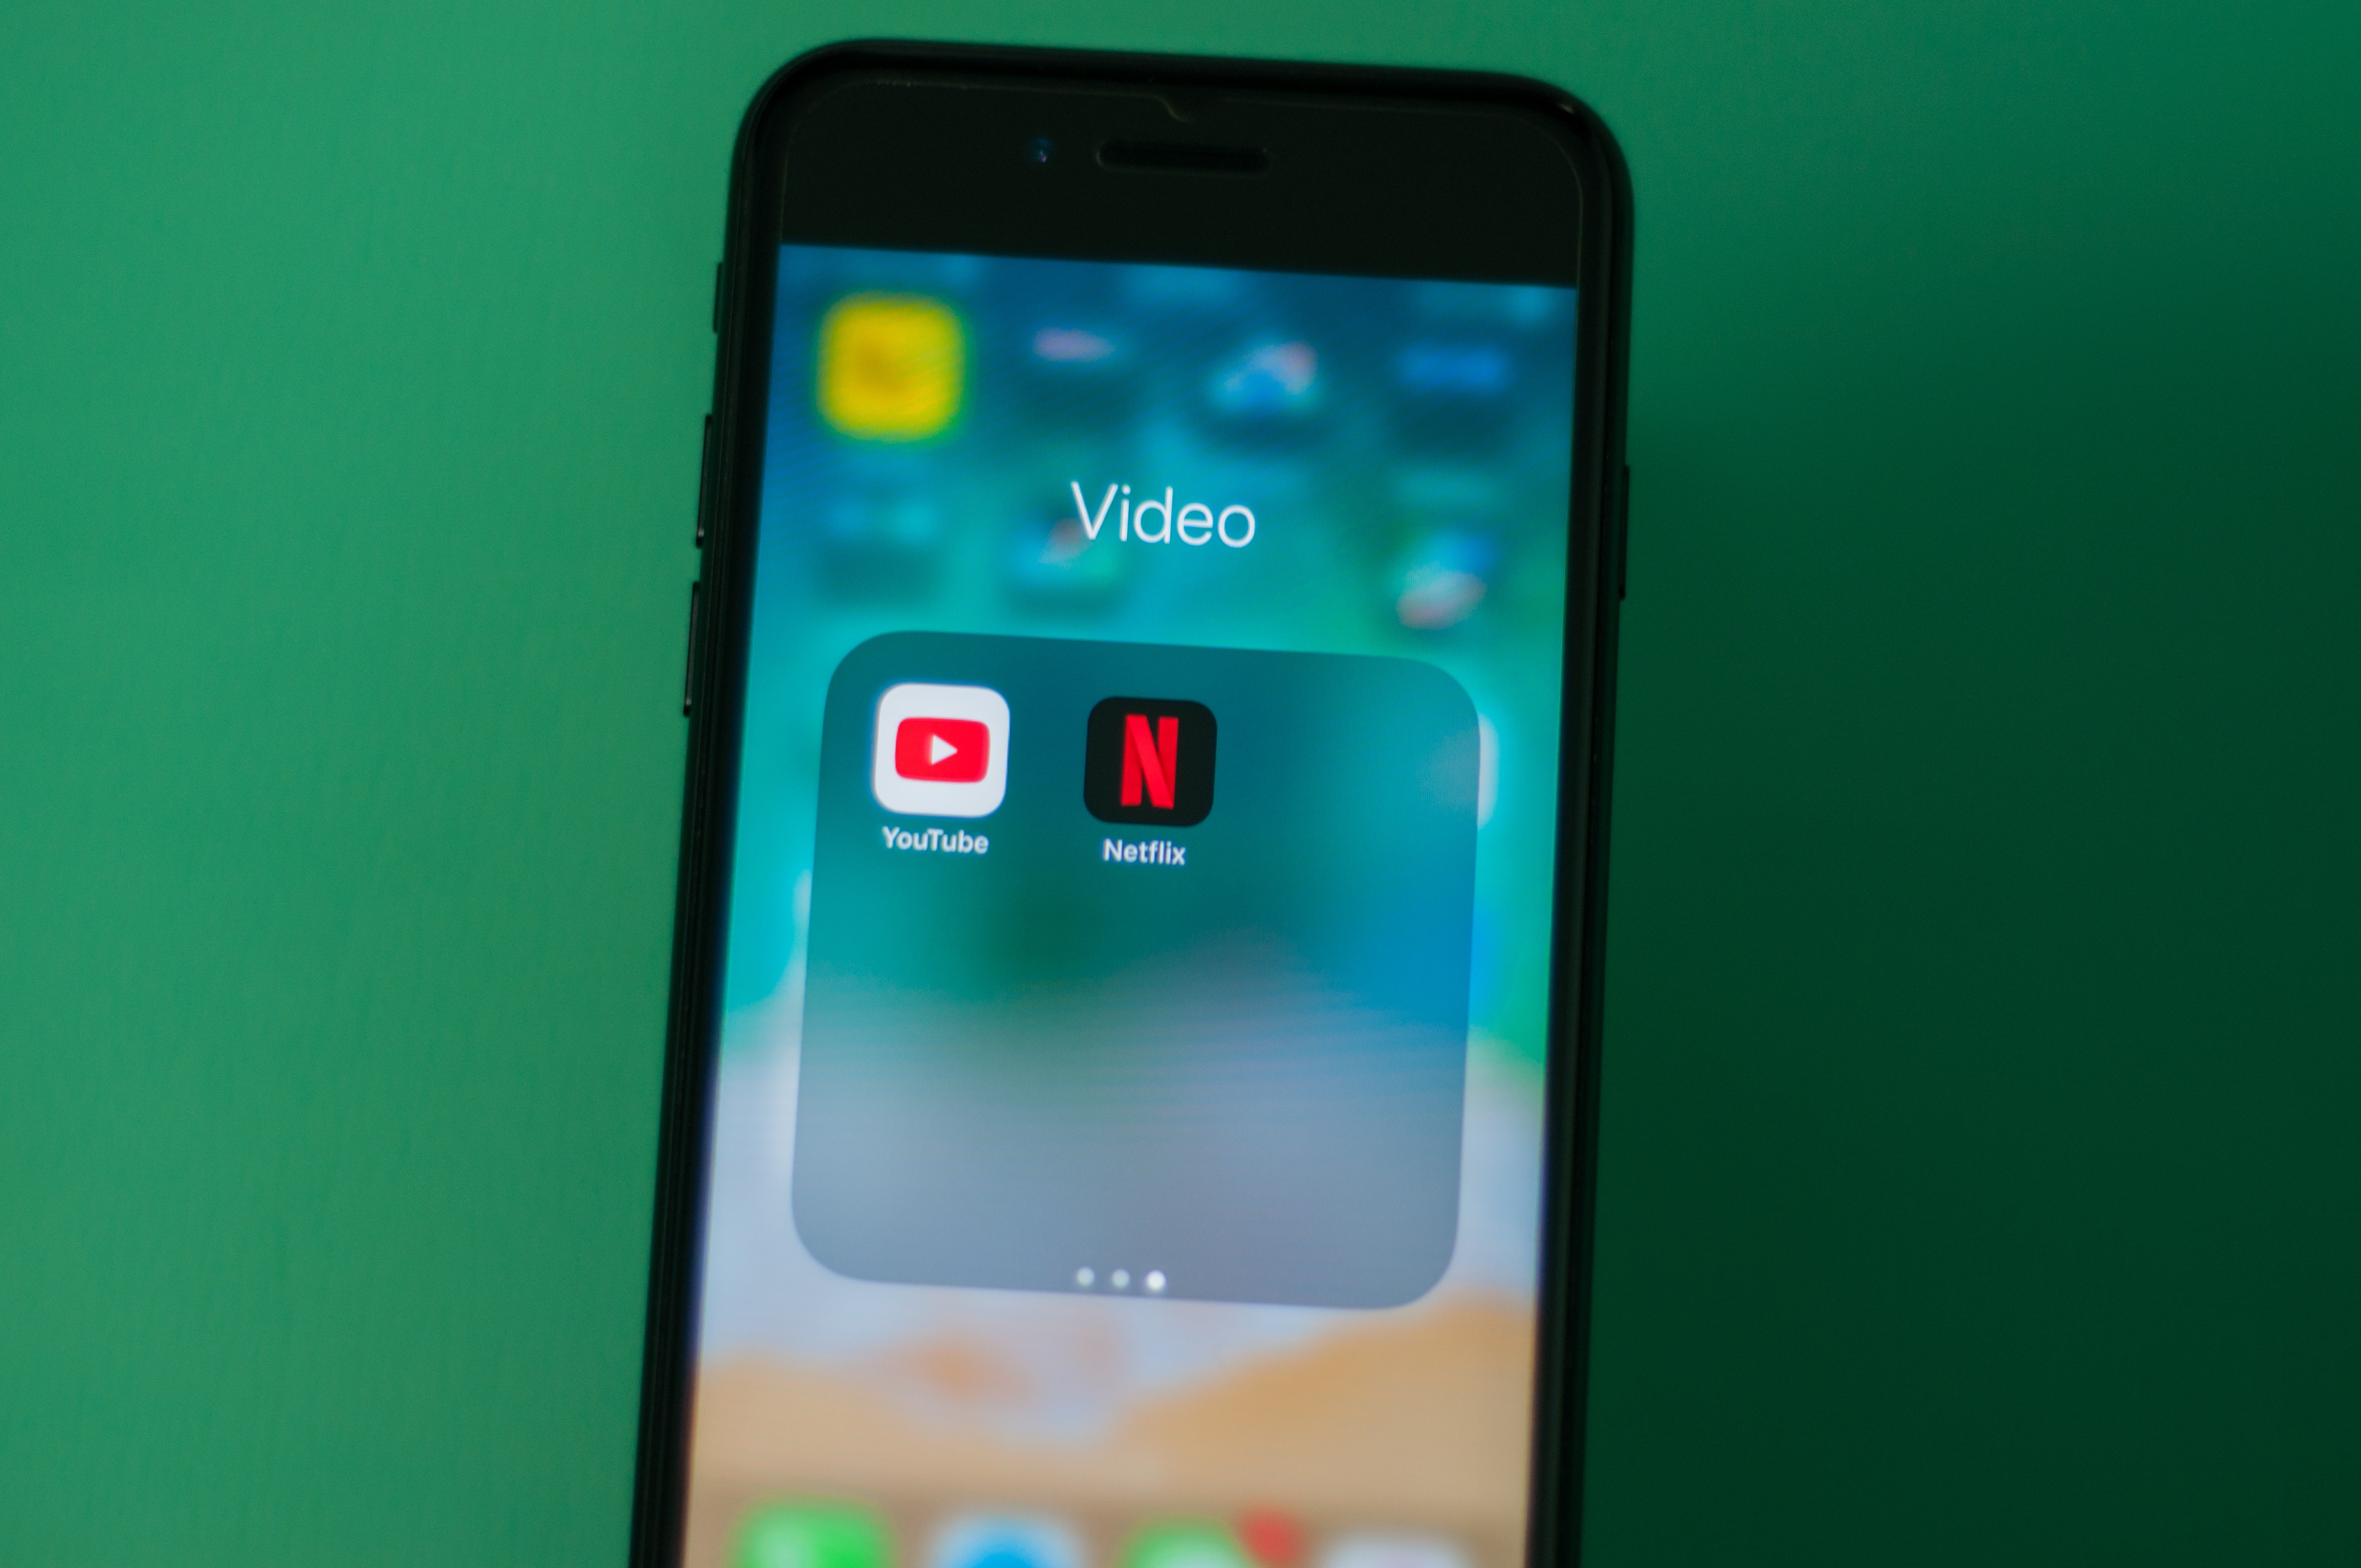 Nearly Half of all Connected TV Time in June Was Spent on Netflix and YouTube